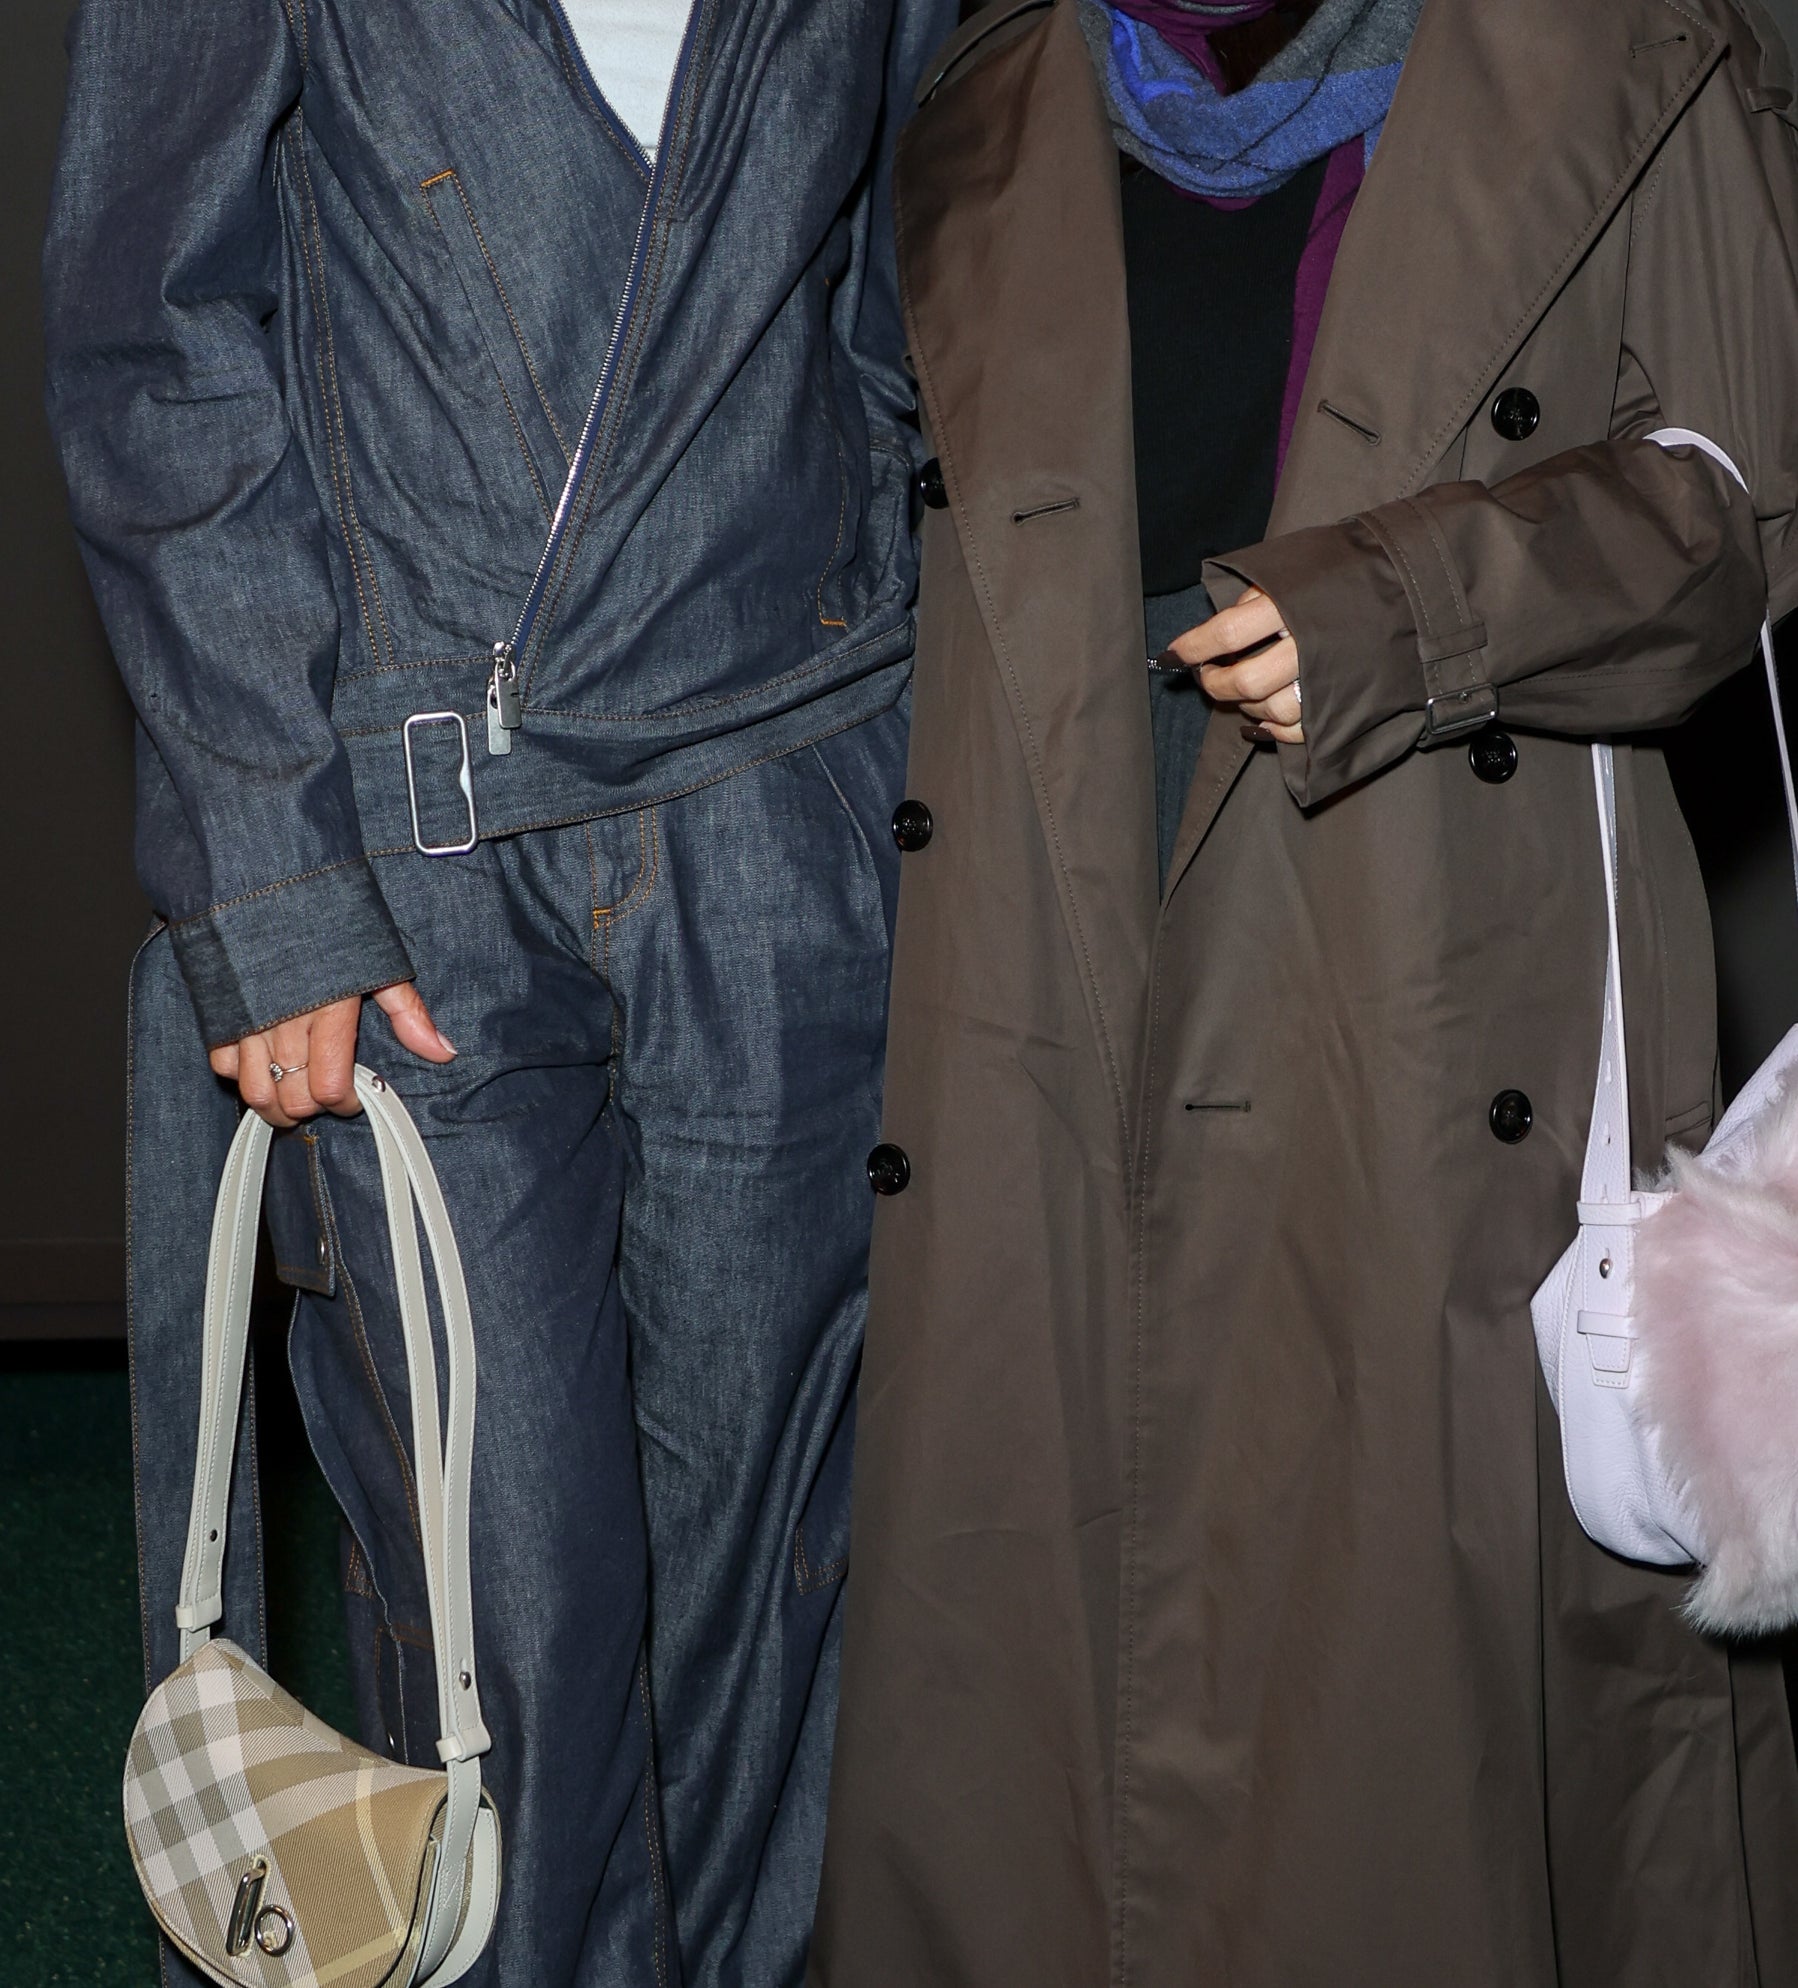 Miquita Oliver in a denim jacket and pants with a shoulder bag, stands next to Lily Allen in a long coat with a fur bag, both posing for a photo